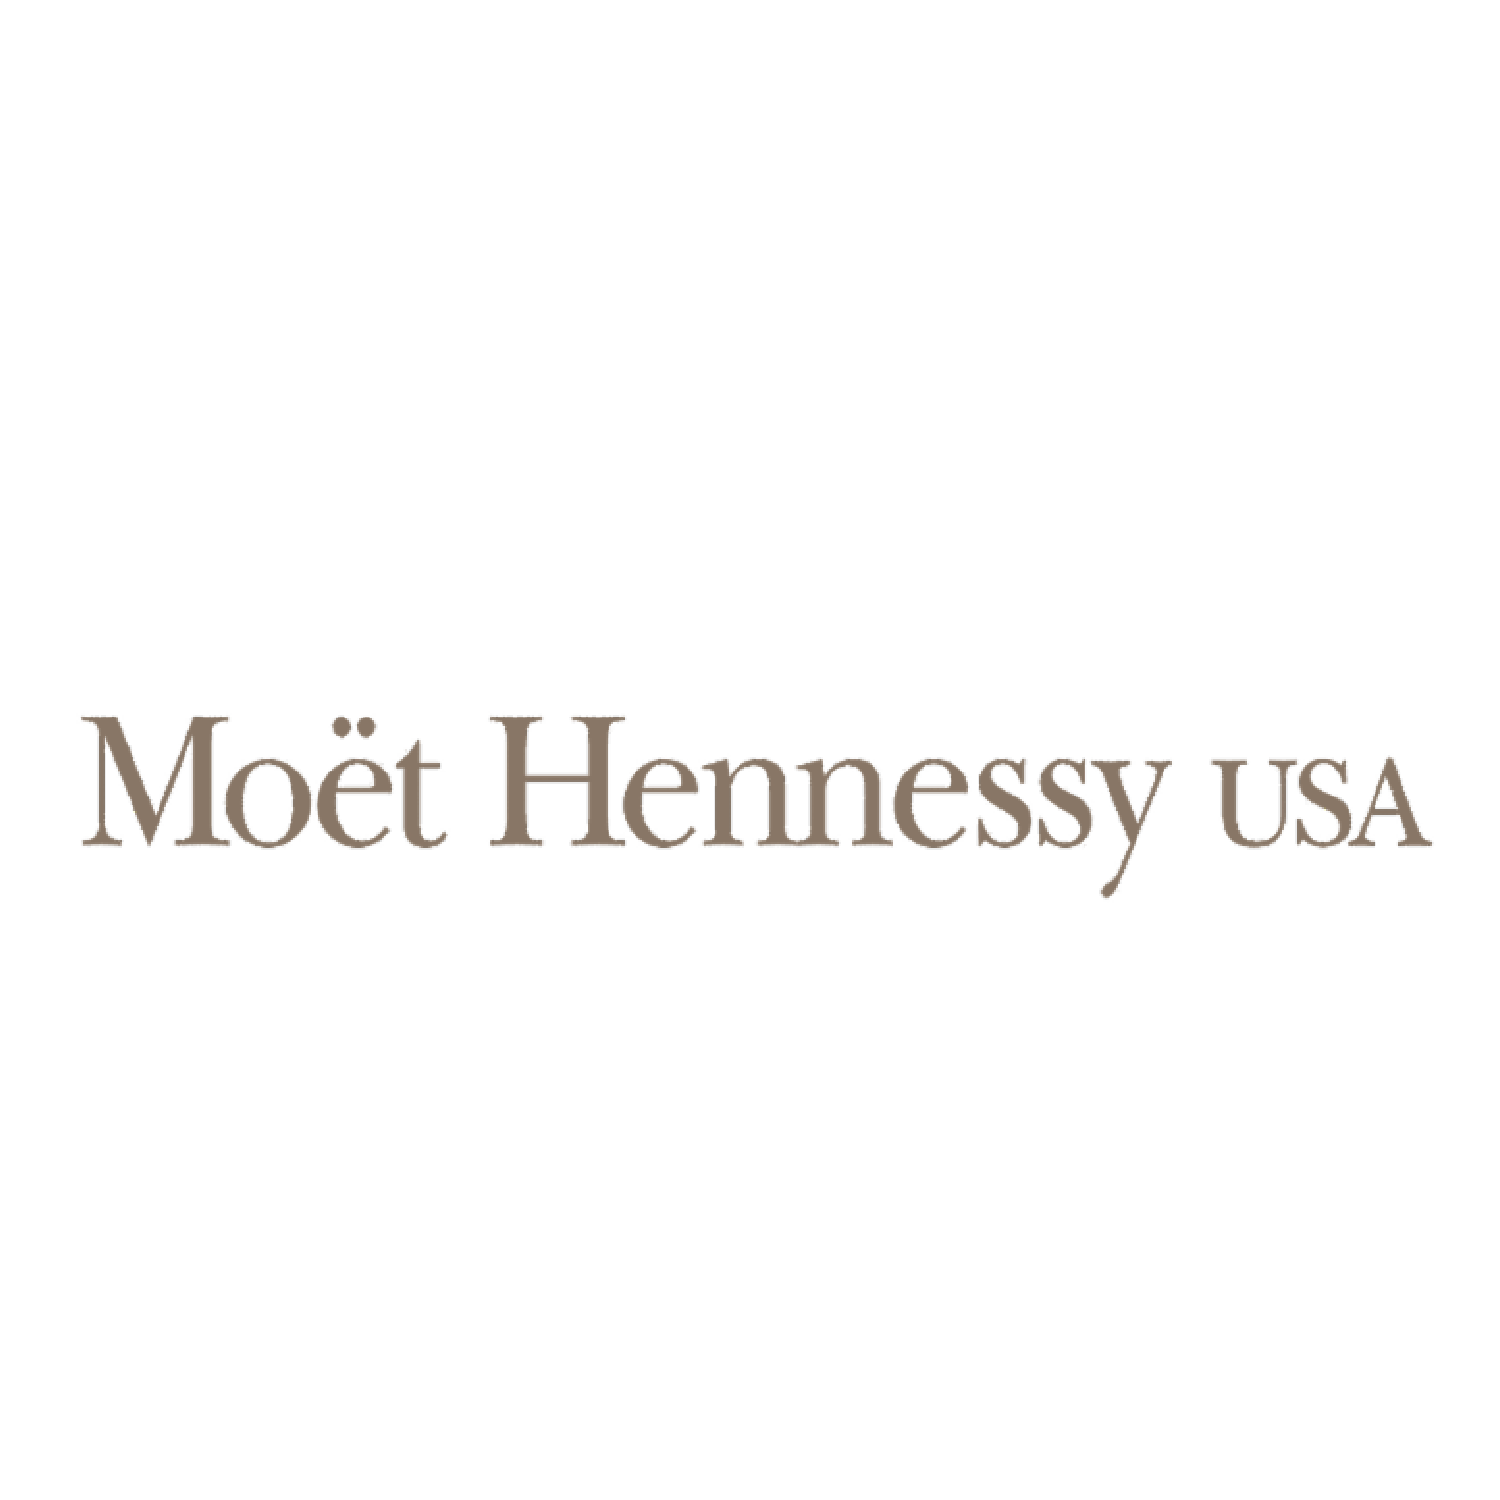 Moët Hennessy USA - Distilled Spirits Council of the United States